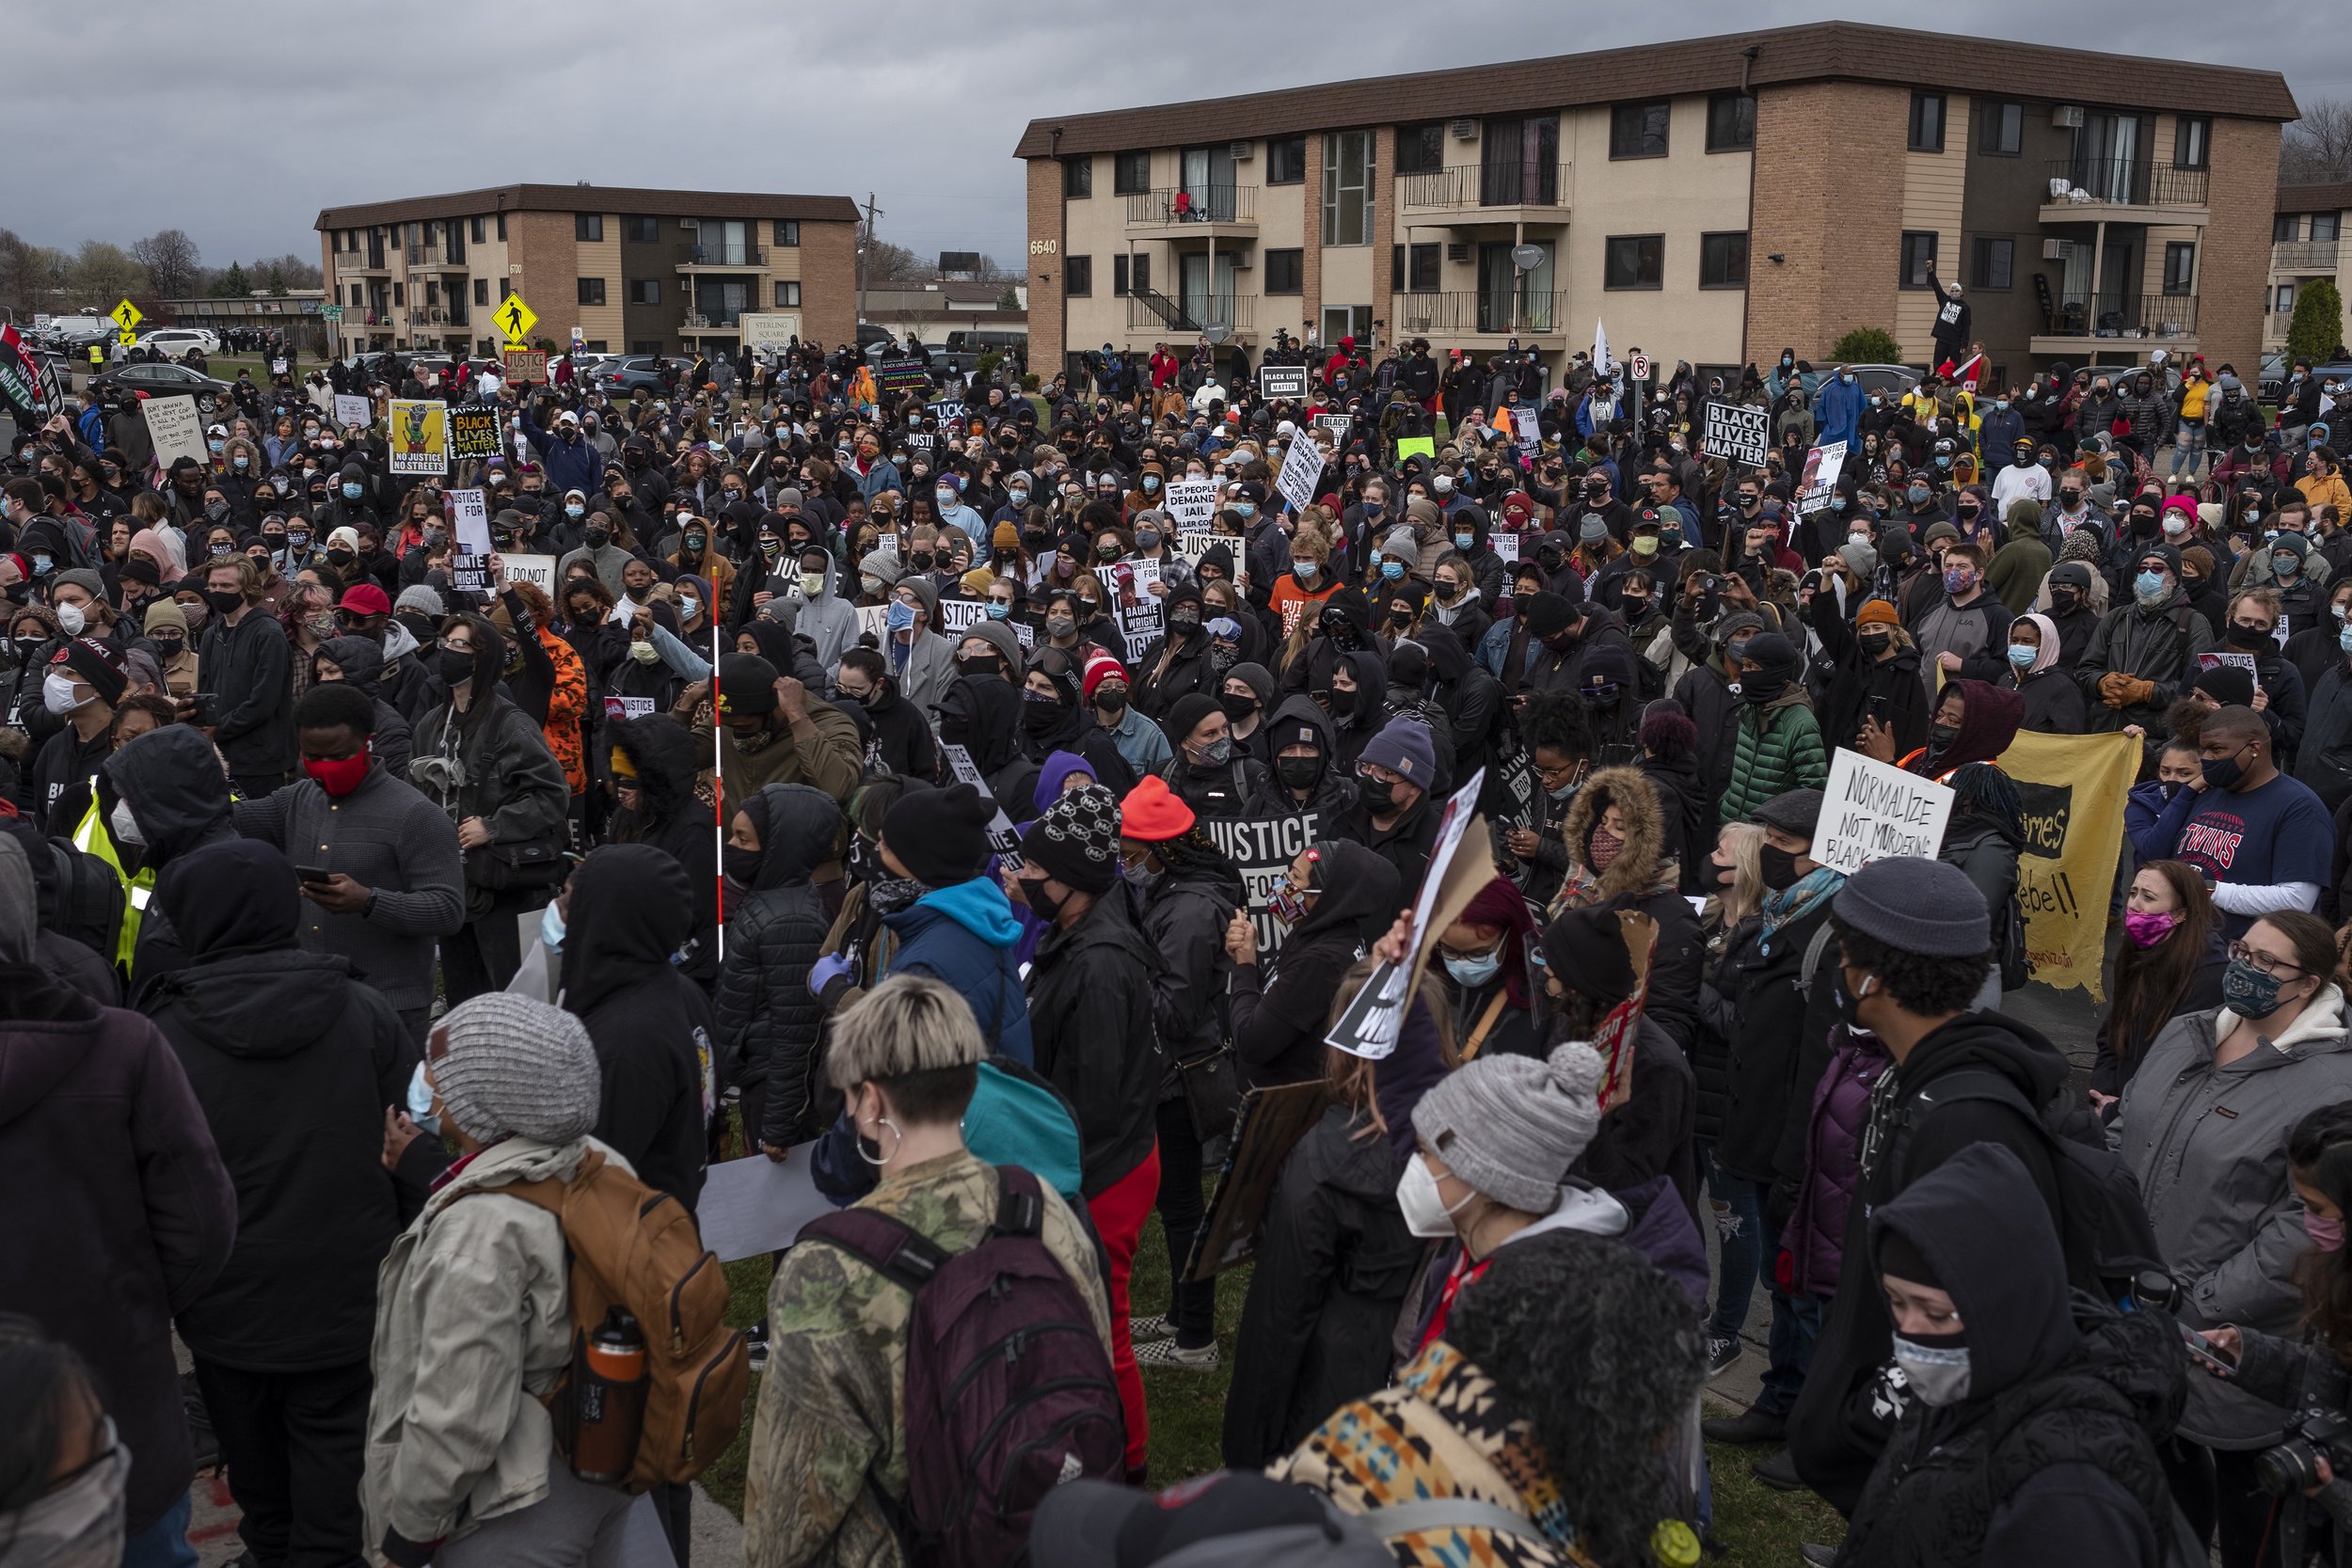  Hundreds of protesters gather near the Brooklyn Center Police Department on Monday, April 12th for the second consecutive day in response to the police killing of Daunte Wright. Clashes between protesters and militarized police went on for several h